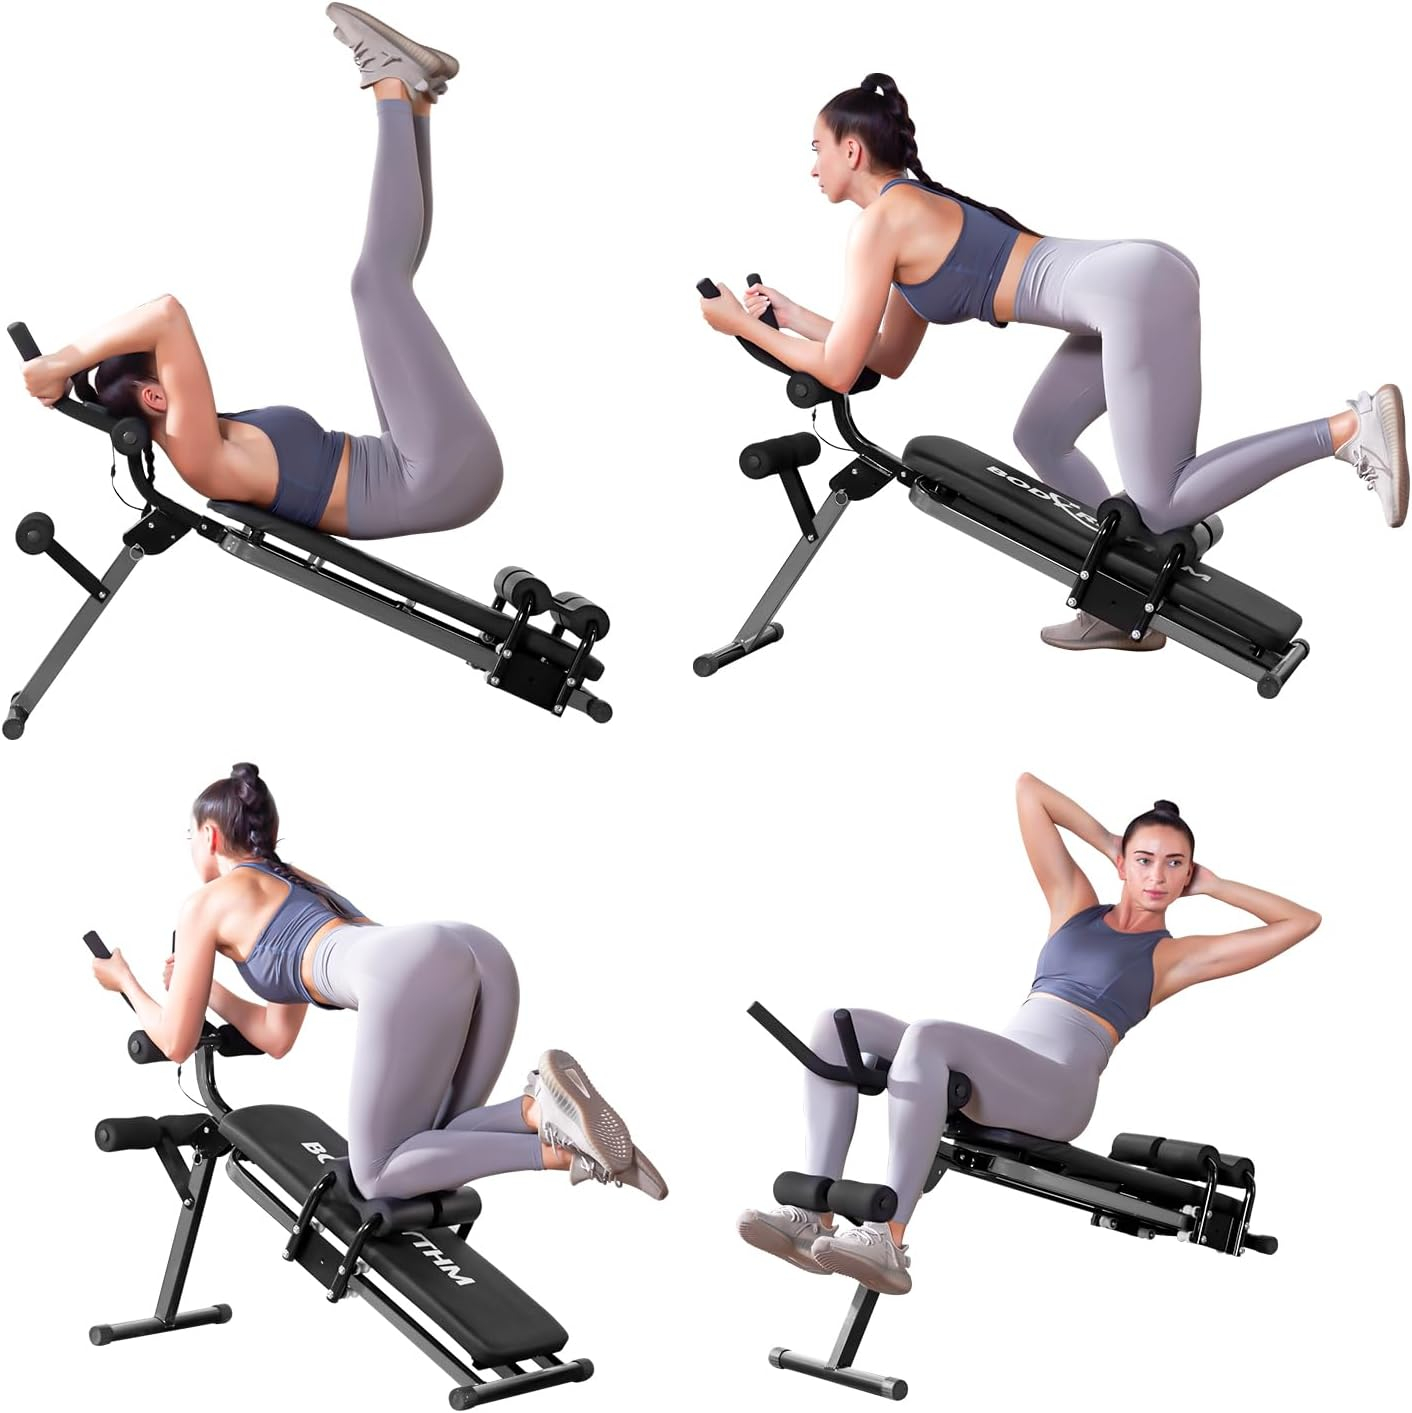 BODY RHYTHM Ab Workout Machine with LCD Monitor for Home Gym,foldable Sit-Up Bench, Full Body Exercise Equipment for Leg,Thighs,Buttocks,Rodeo,Sit-up Exercise.